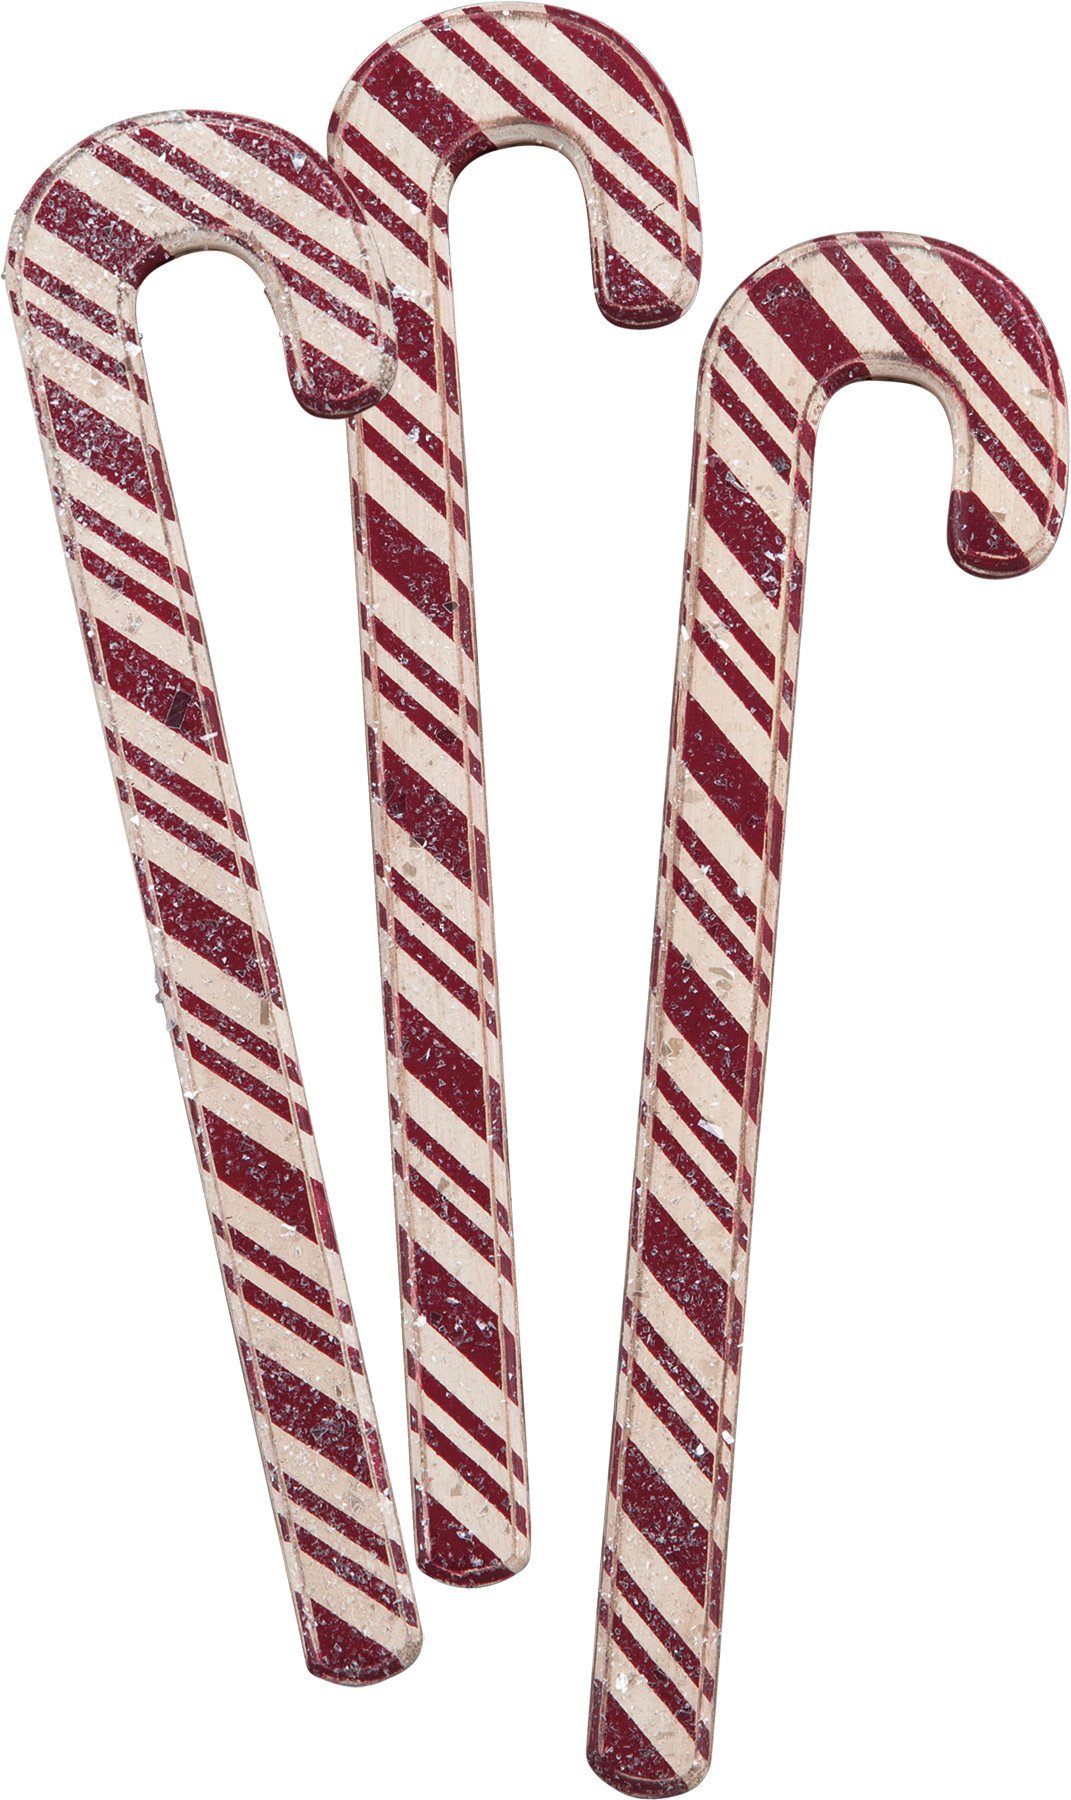 Wooden Candy Canes | Primitives By Kathy